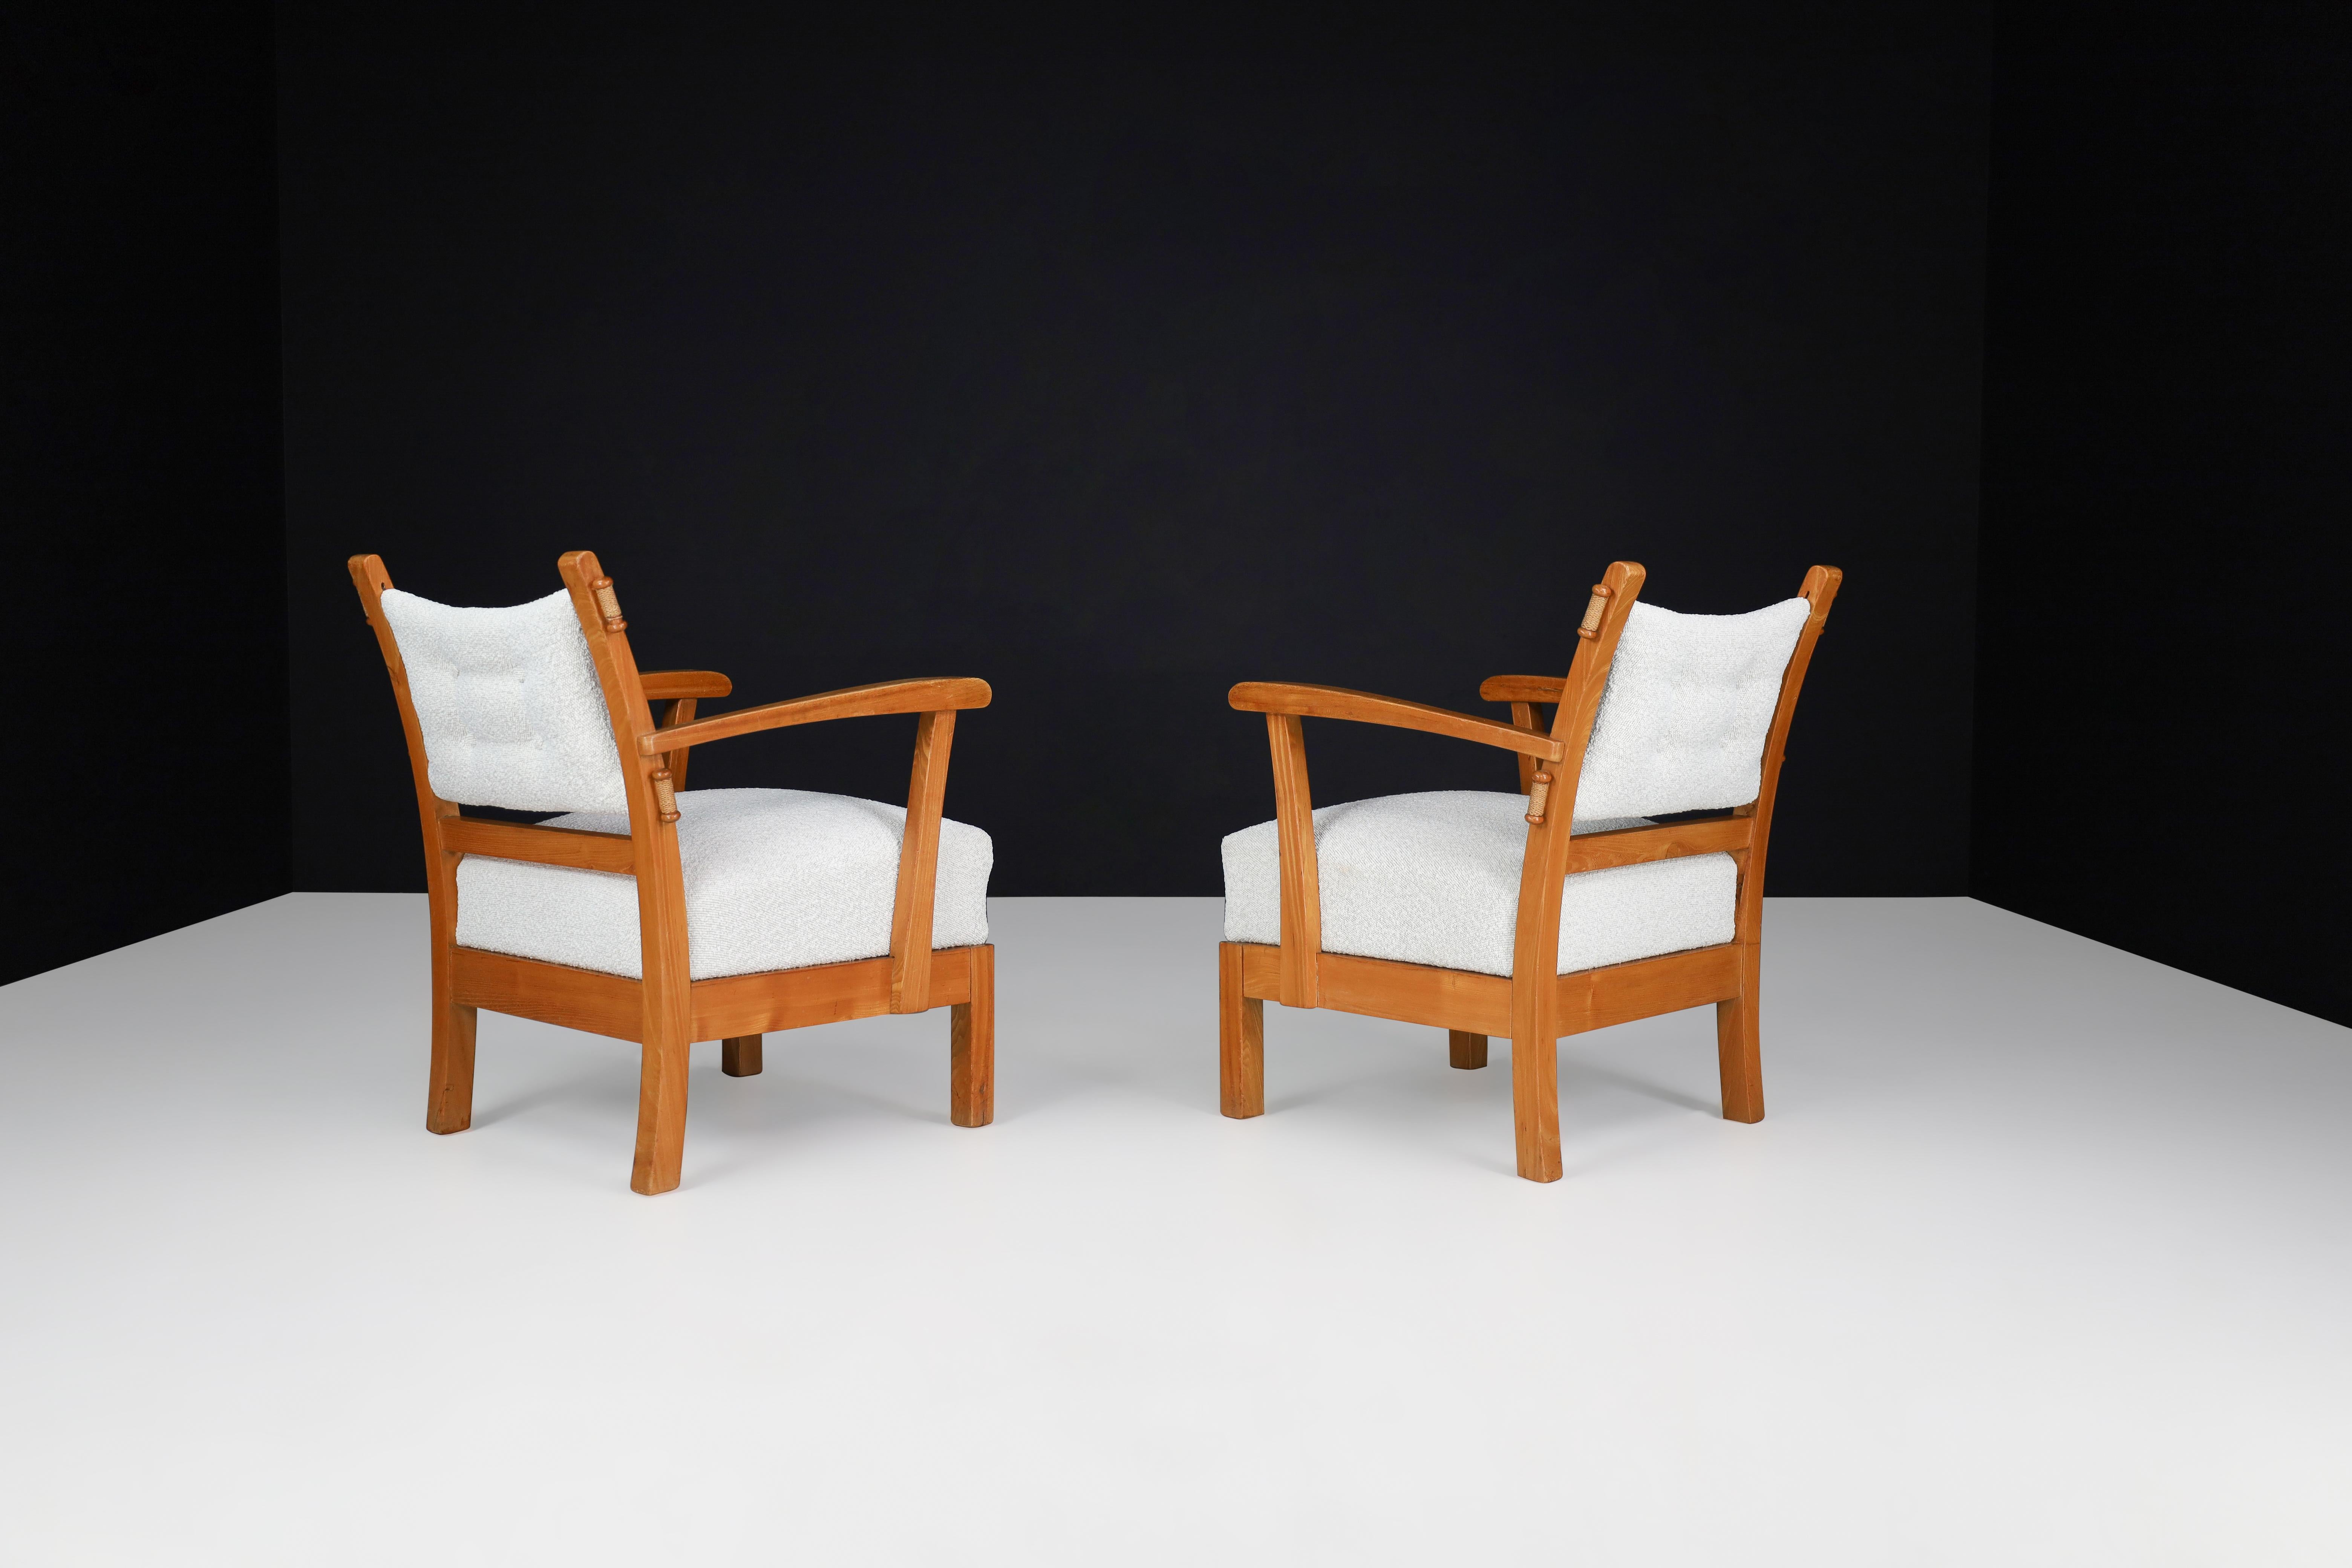 Reupholstered Lounge chairs with sculptural Elm wooden frame France, 1950s.

Set of two lounge chairs in solid elm and Reupholstered bouclé fabric, France, 1950s. The wood grain is nicely visible, especially on the sculpted armrests. These